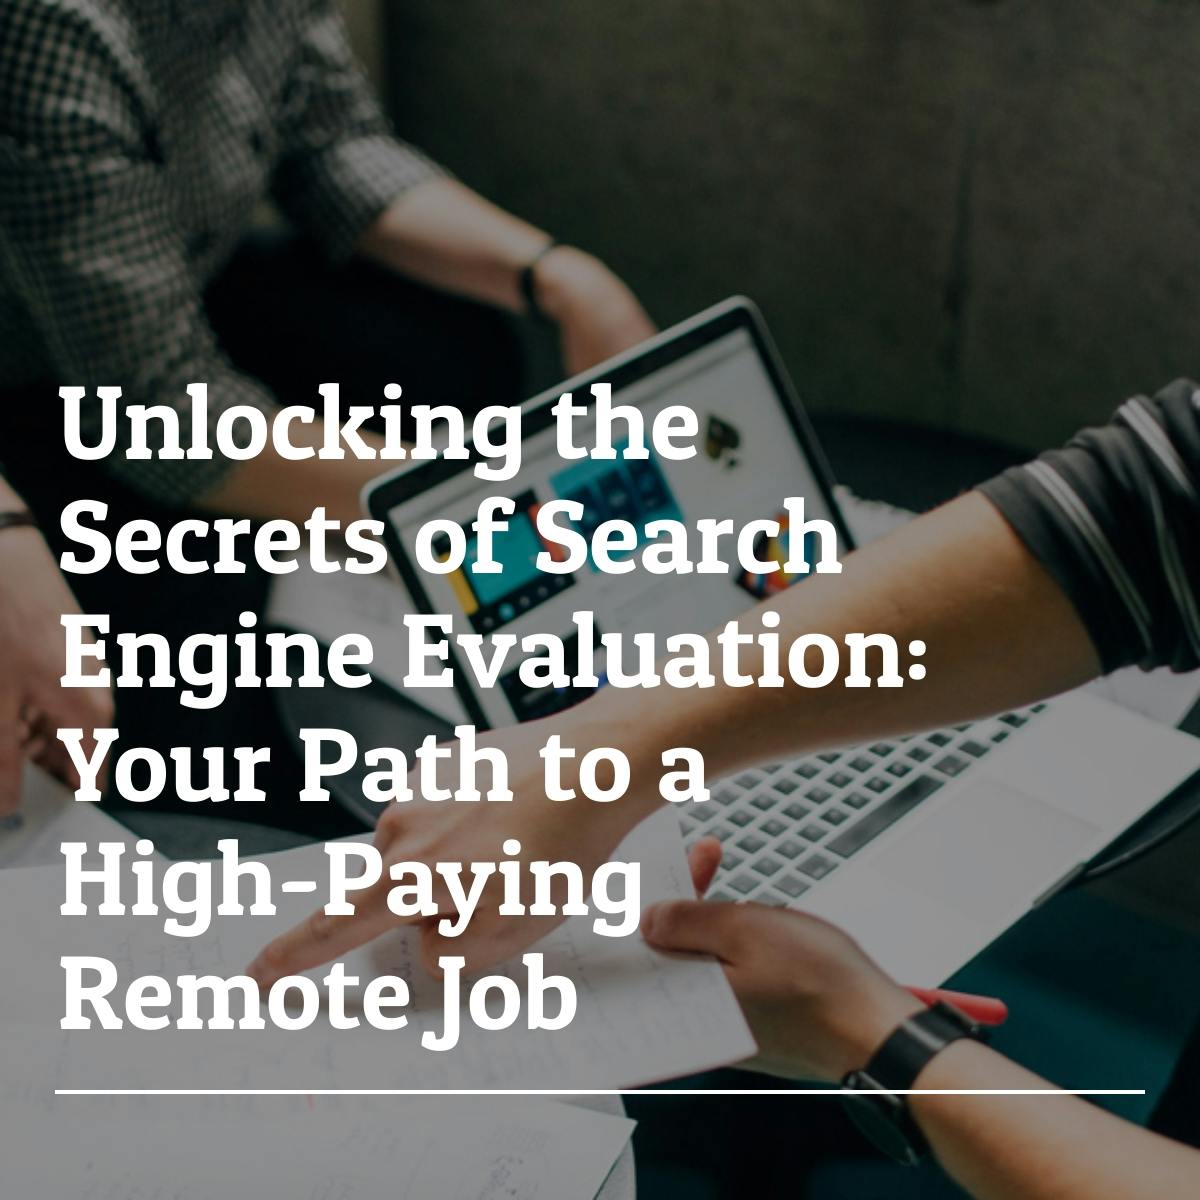 Unlocking the Secrets of Search Engine Evaluation: Your Path to a High-Paying Remote Job